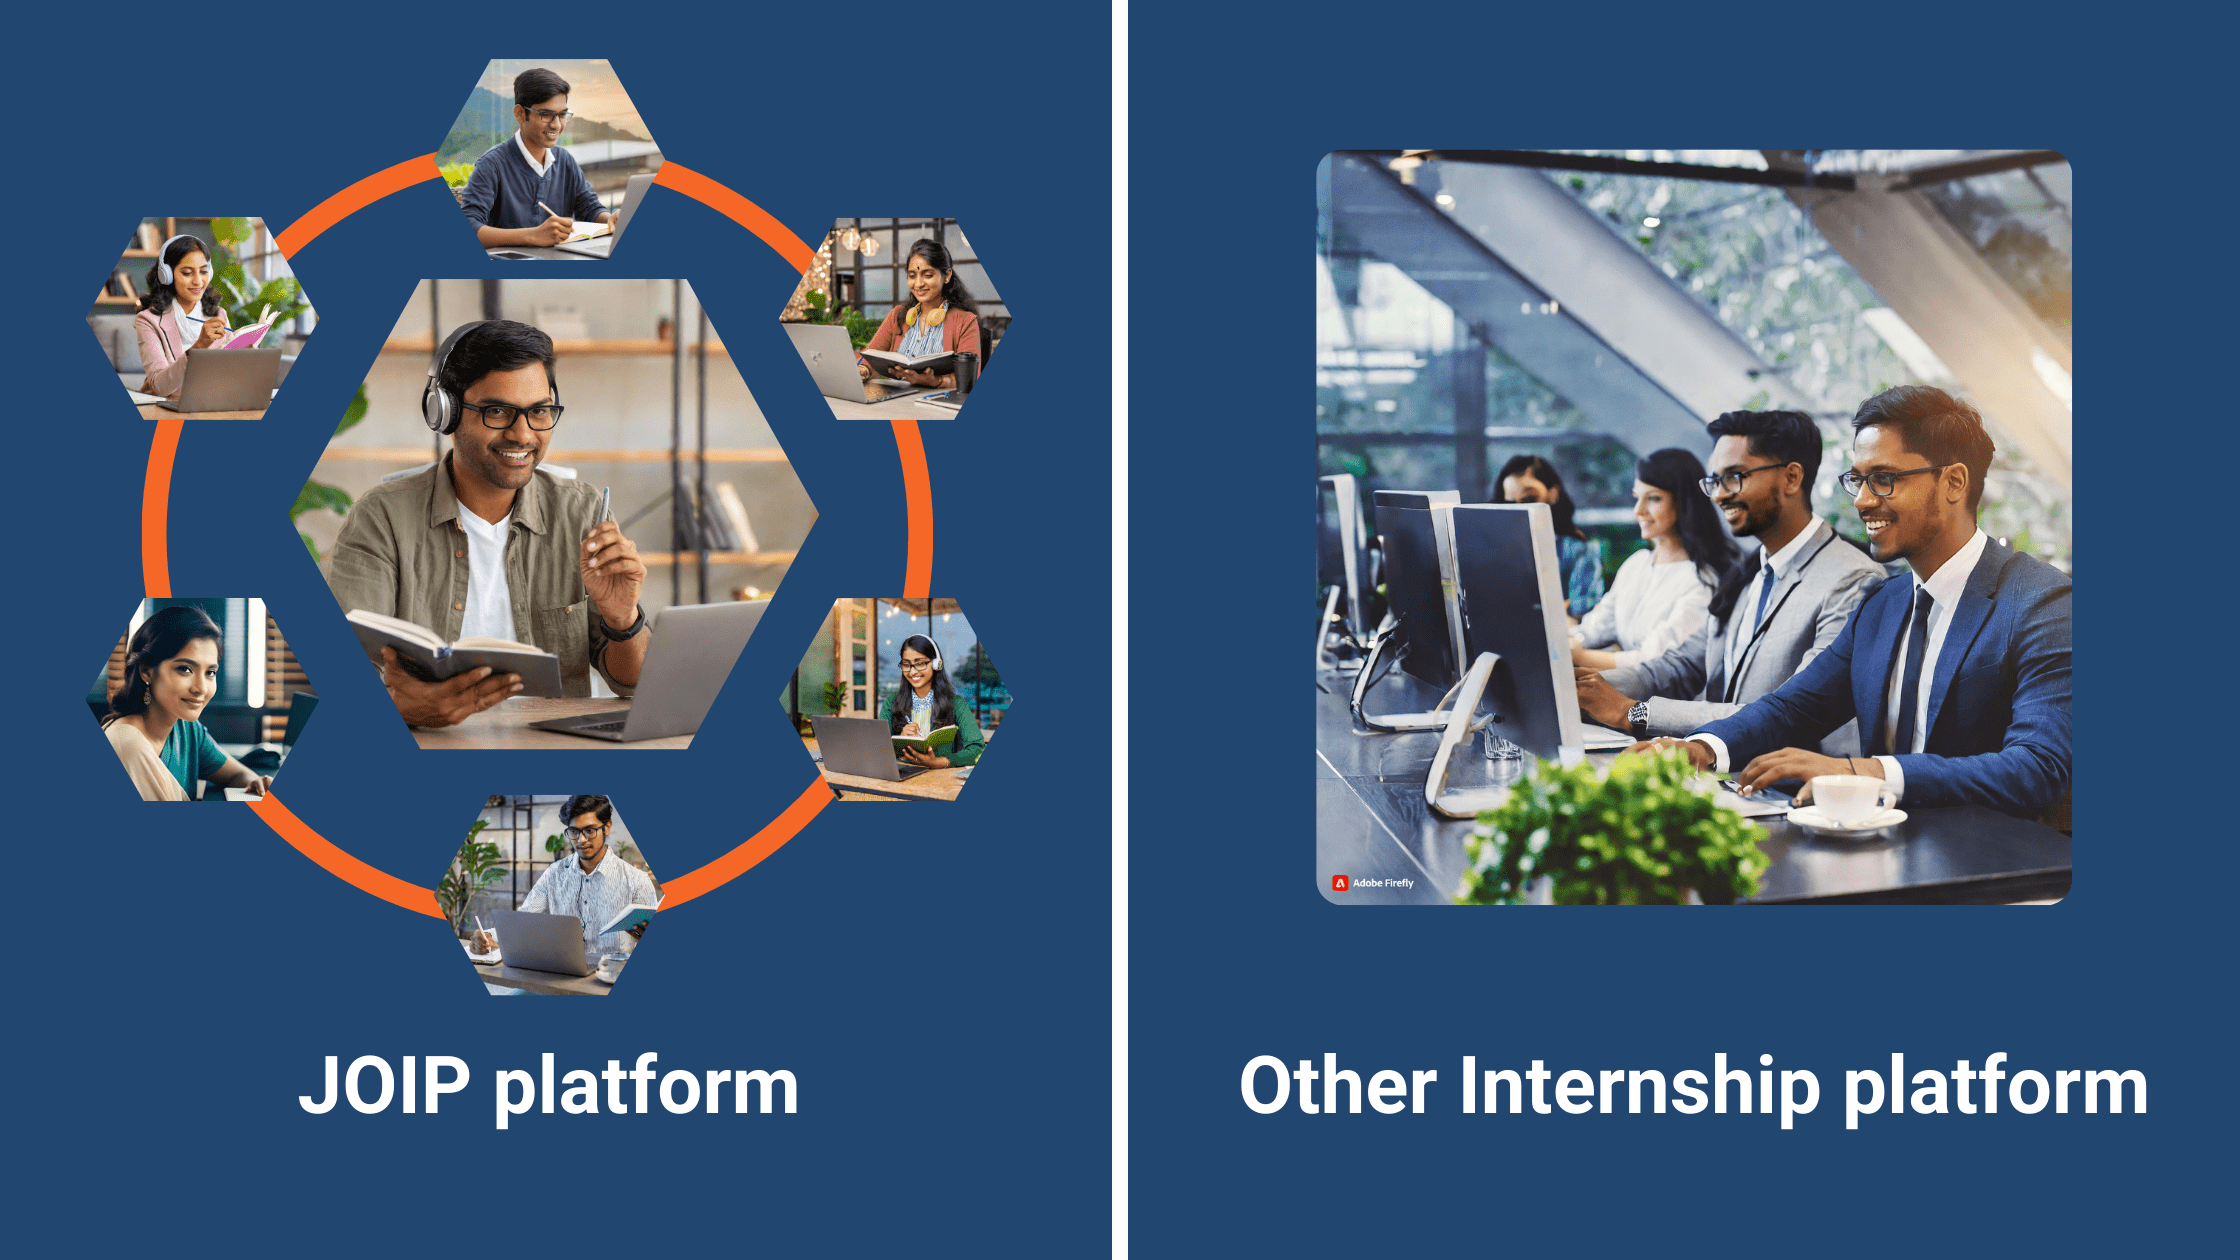 How is JOIP different from other Internship Platforms?